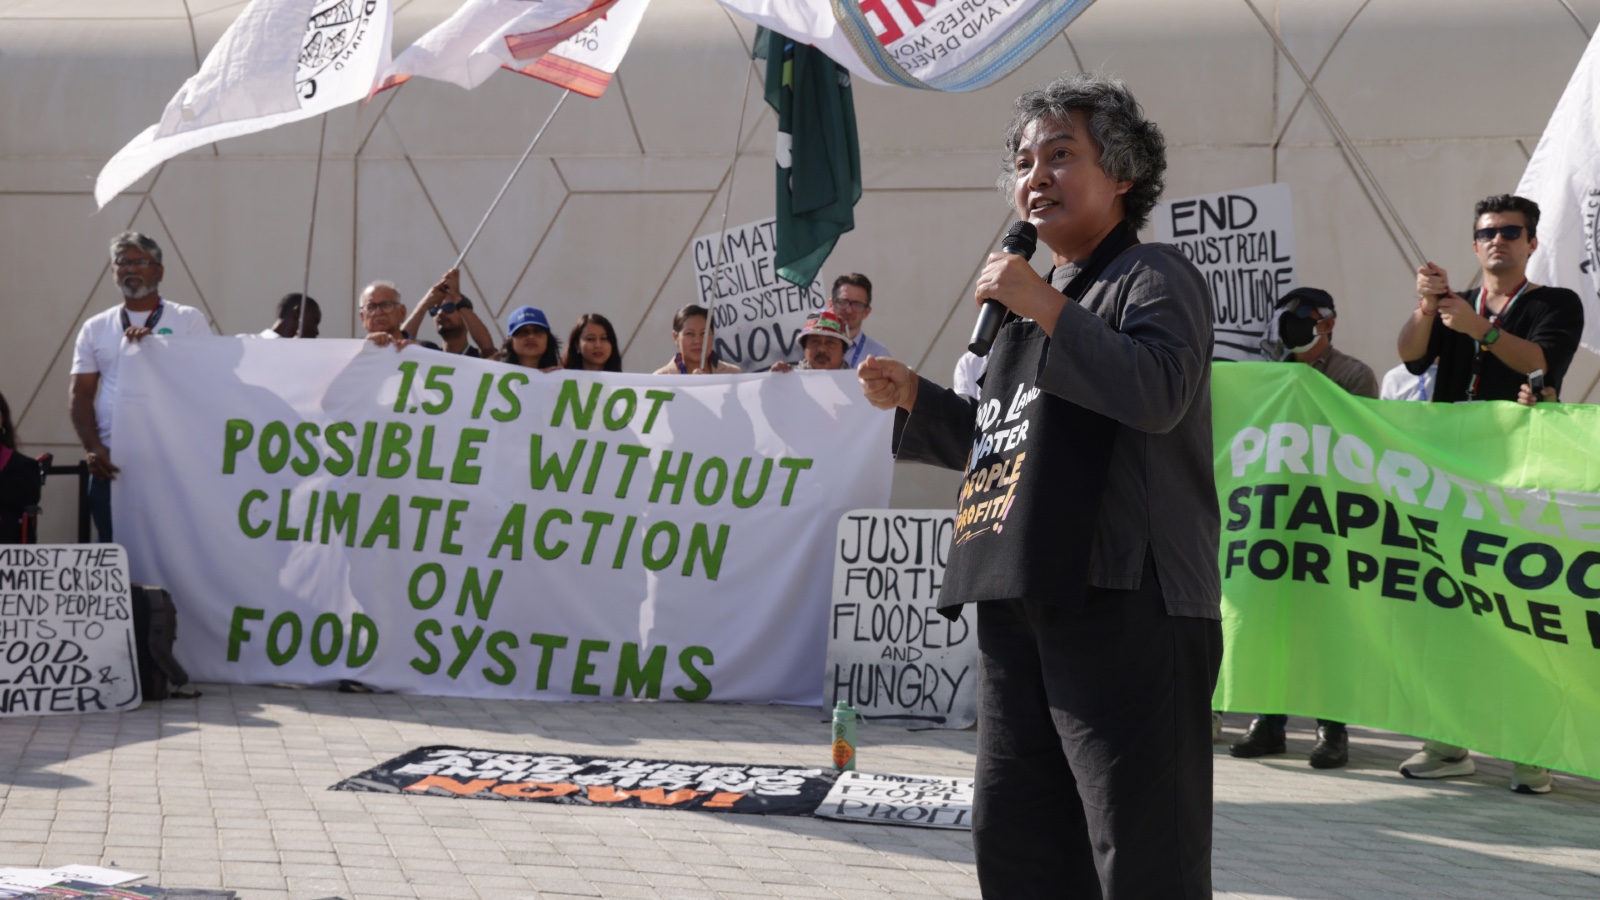 An activist at COP28 calls for climate action on food systems.